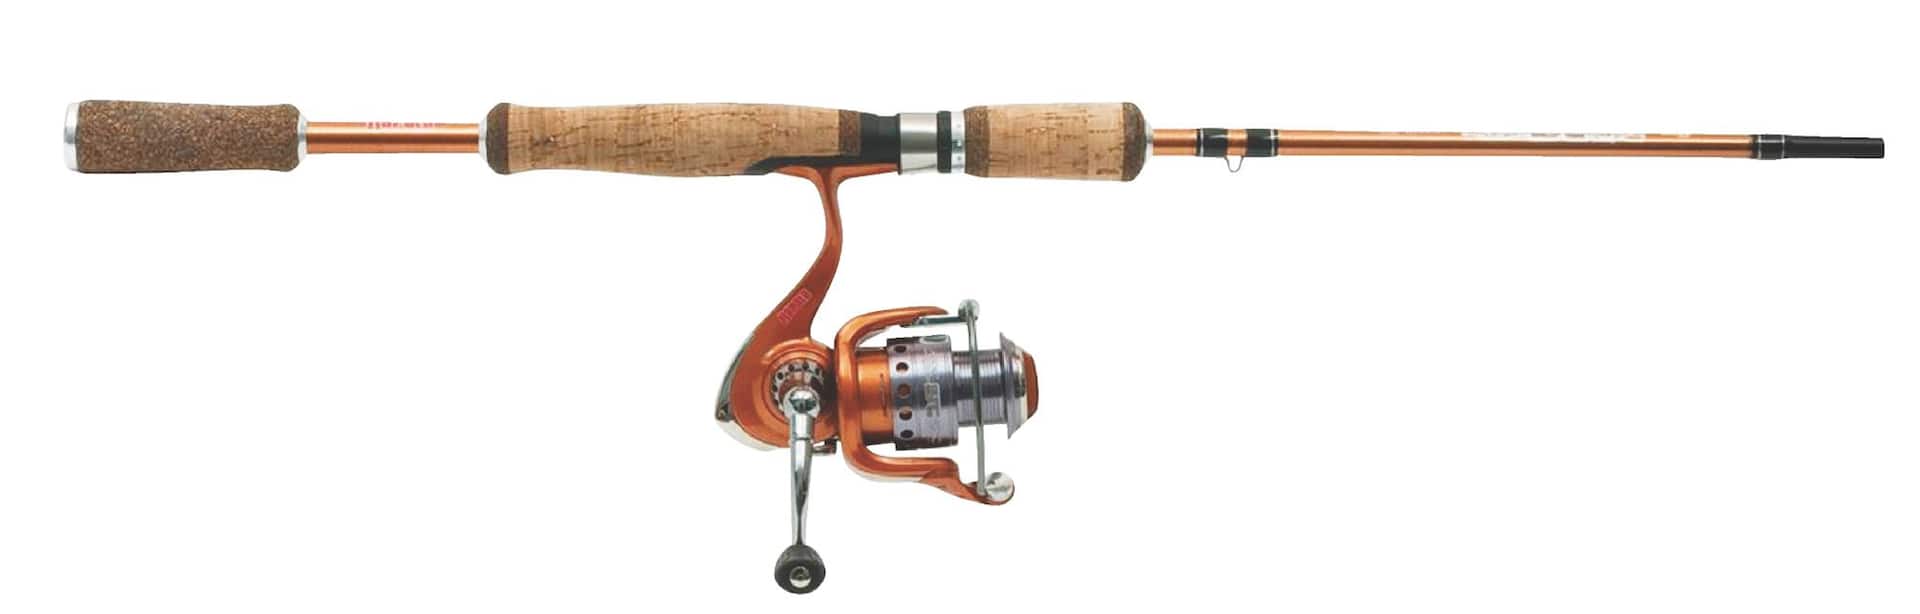 Zebco Rhino Spinning Fishing Rod and Reel Combo, Pre-Spooled, Anti